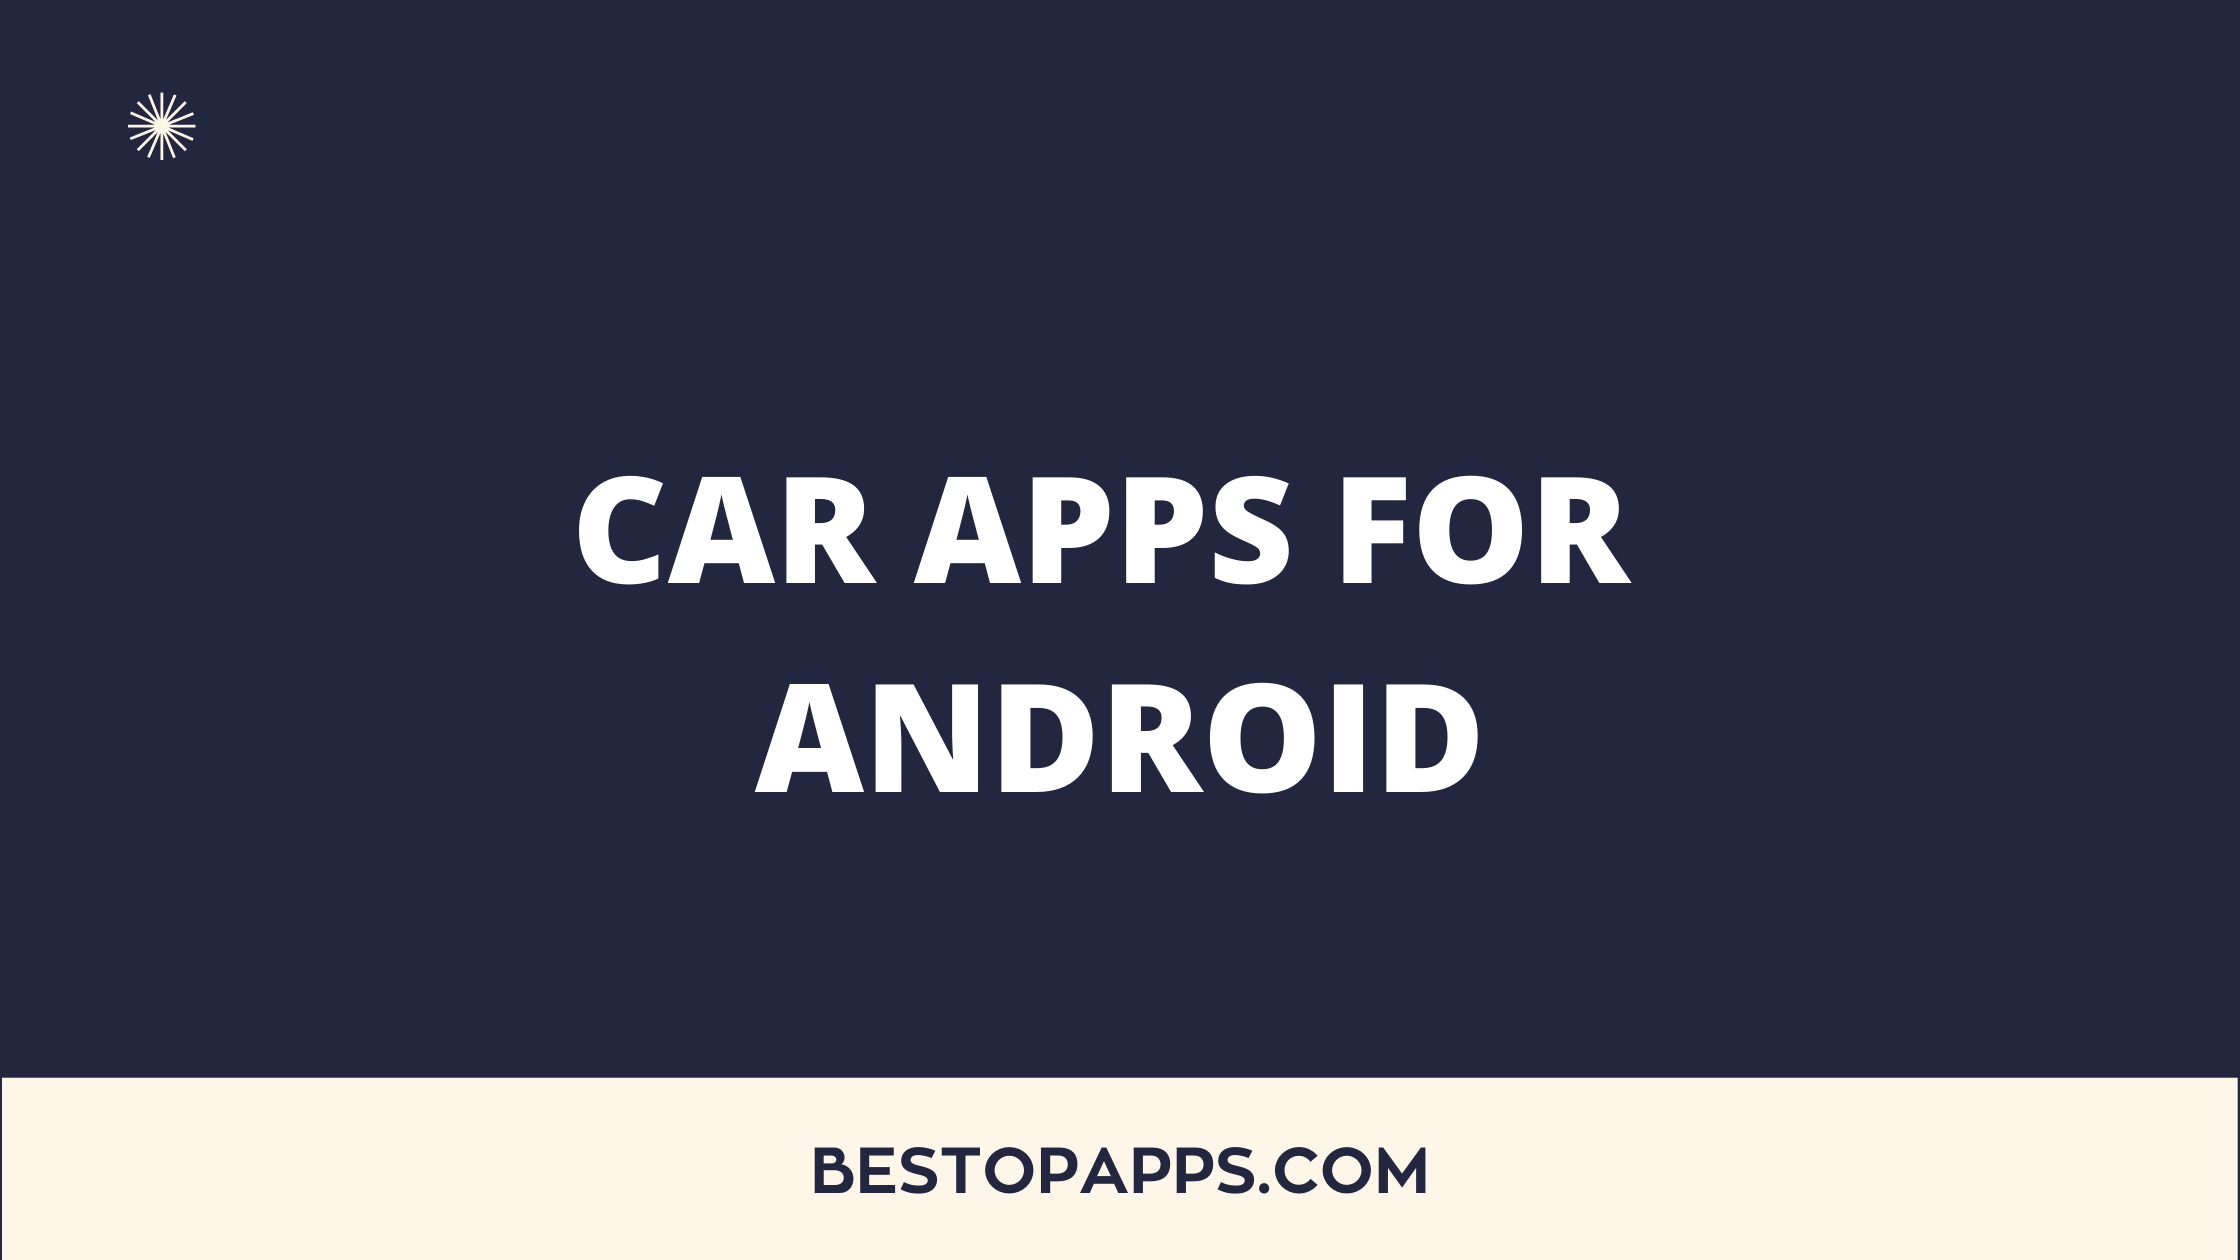 CAR APPS FOR ANDROID